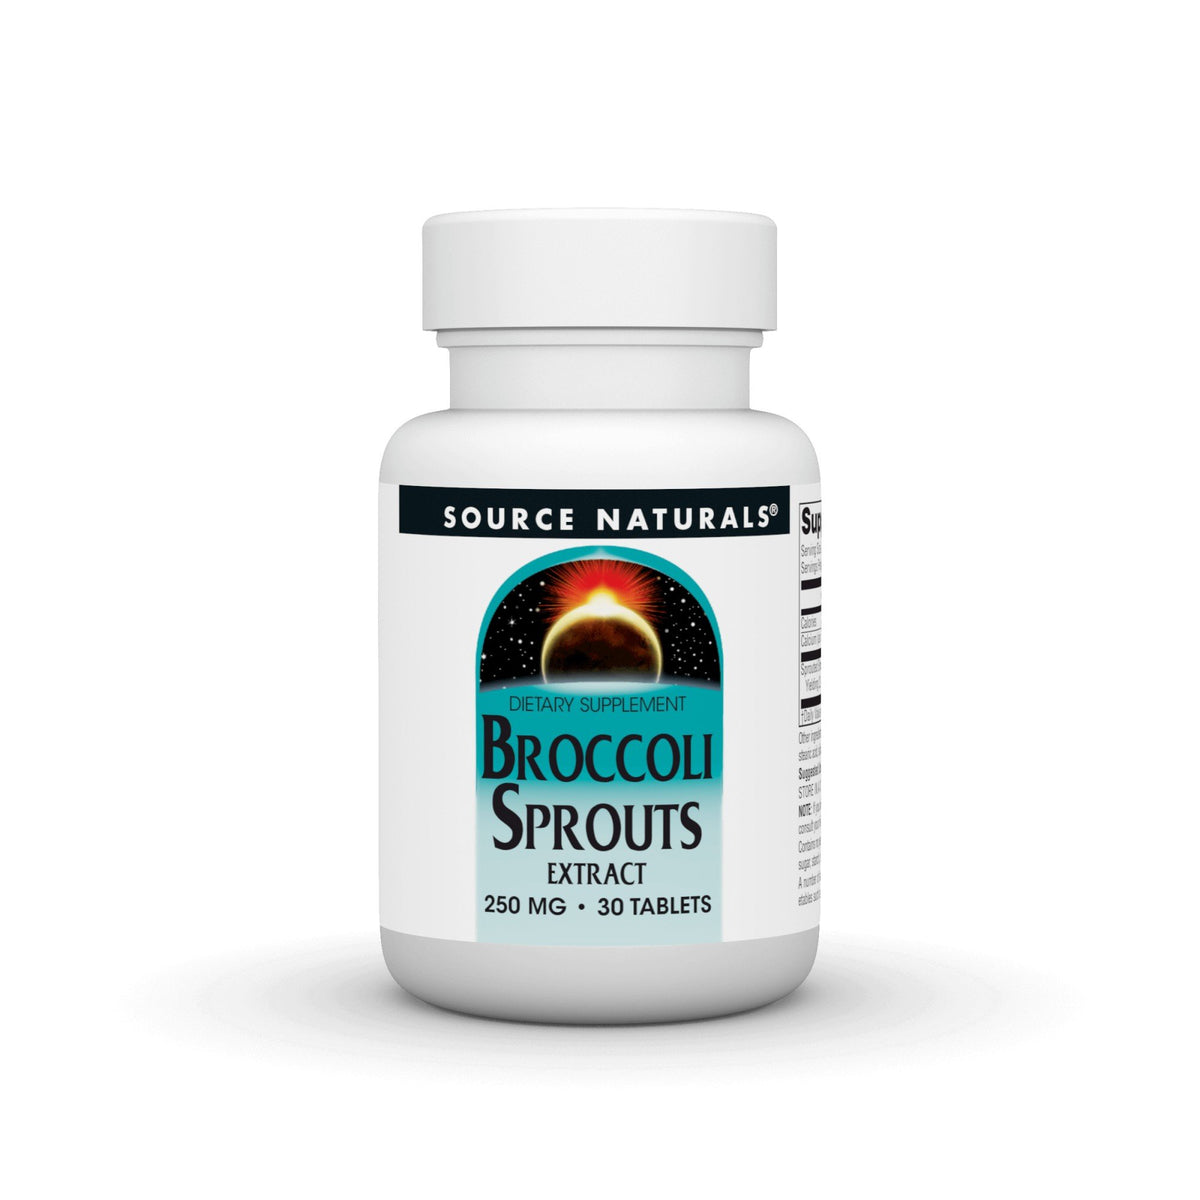 Source Naturals, Inc. Broccoli Sprouts Extract 250 mg 30 Tablet